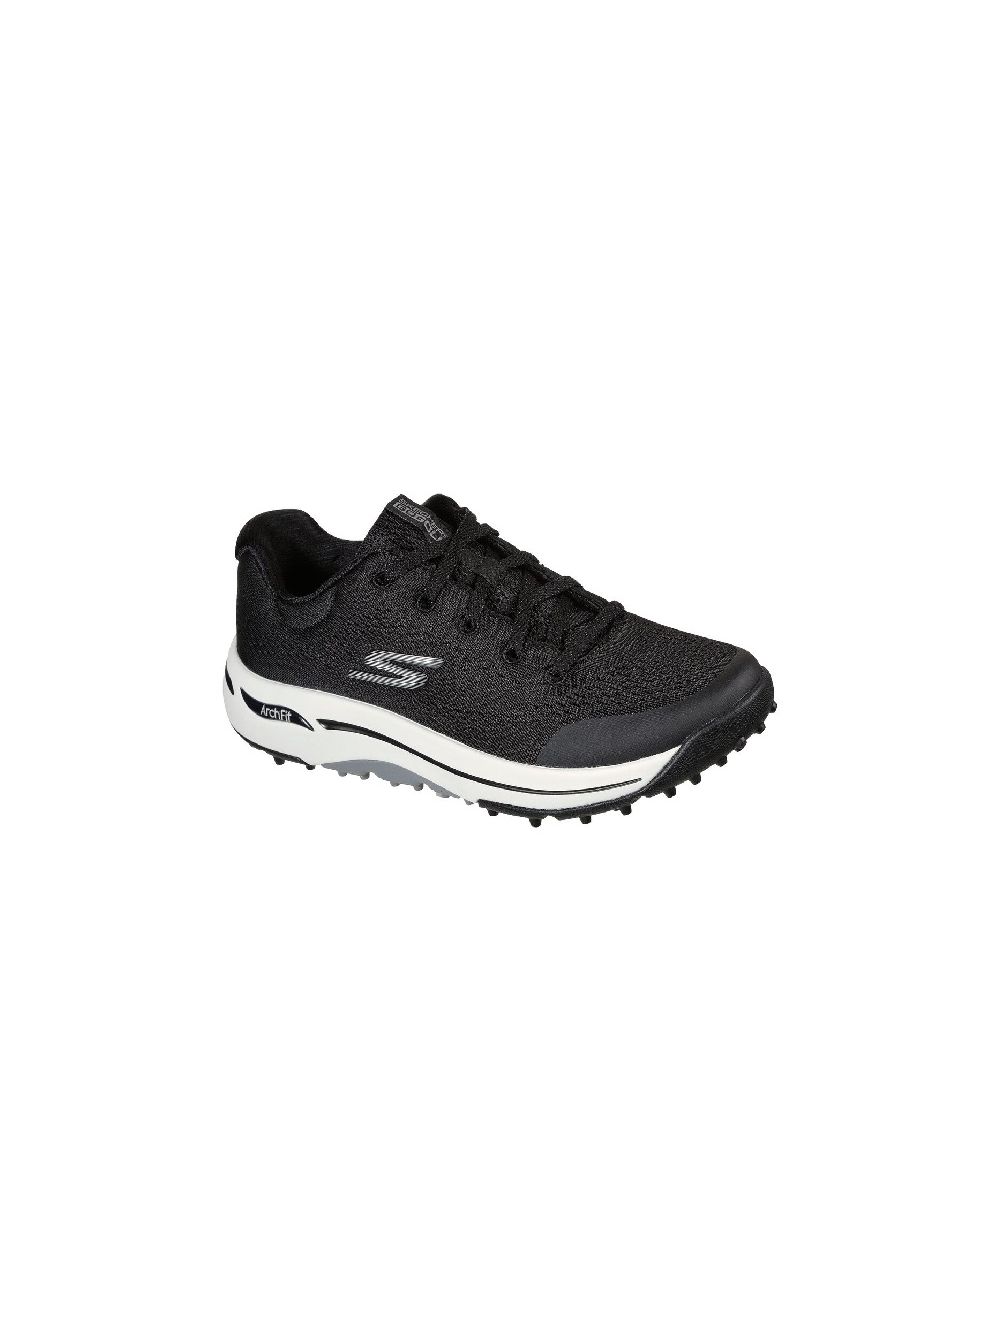 arch fitters skechers